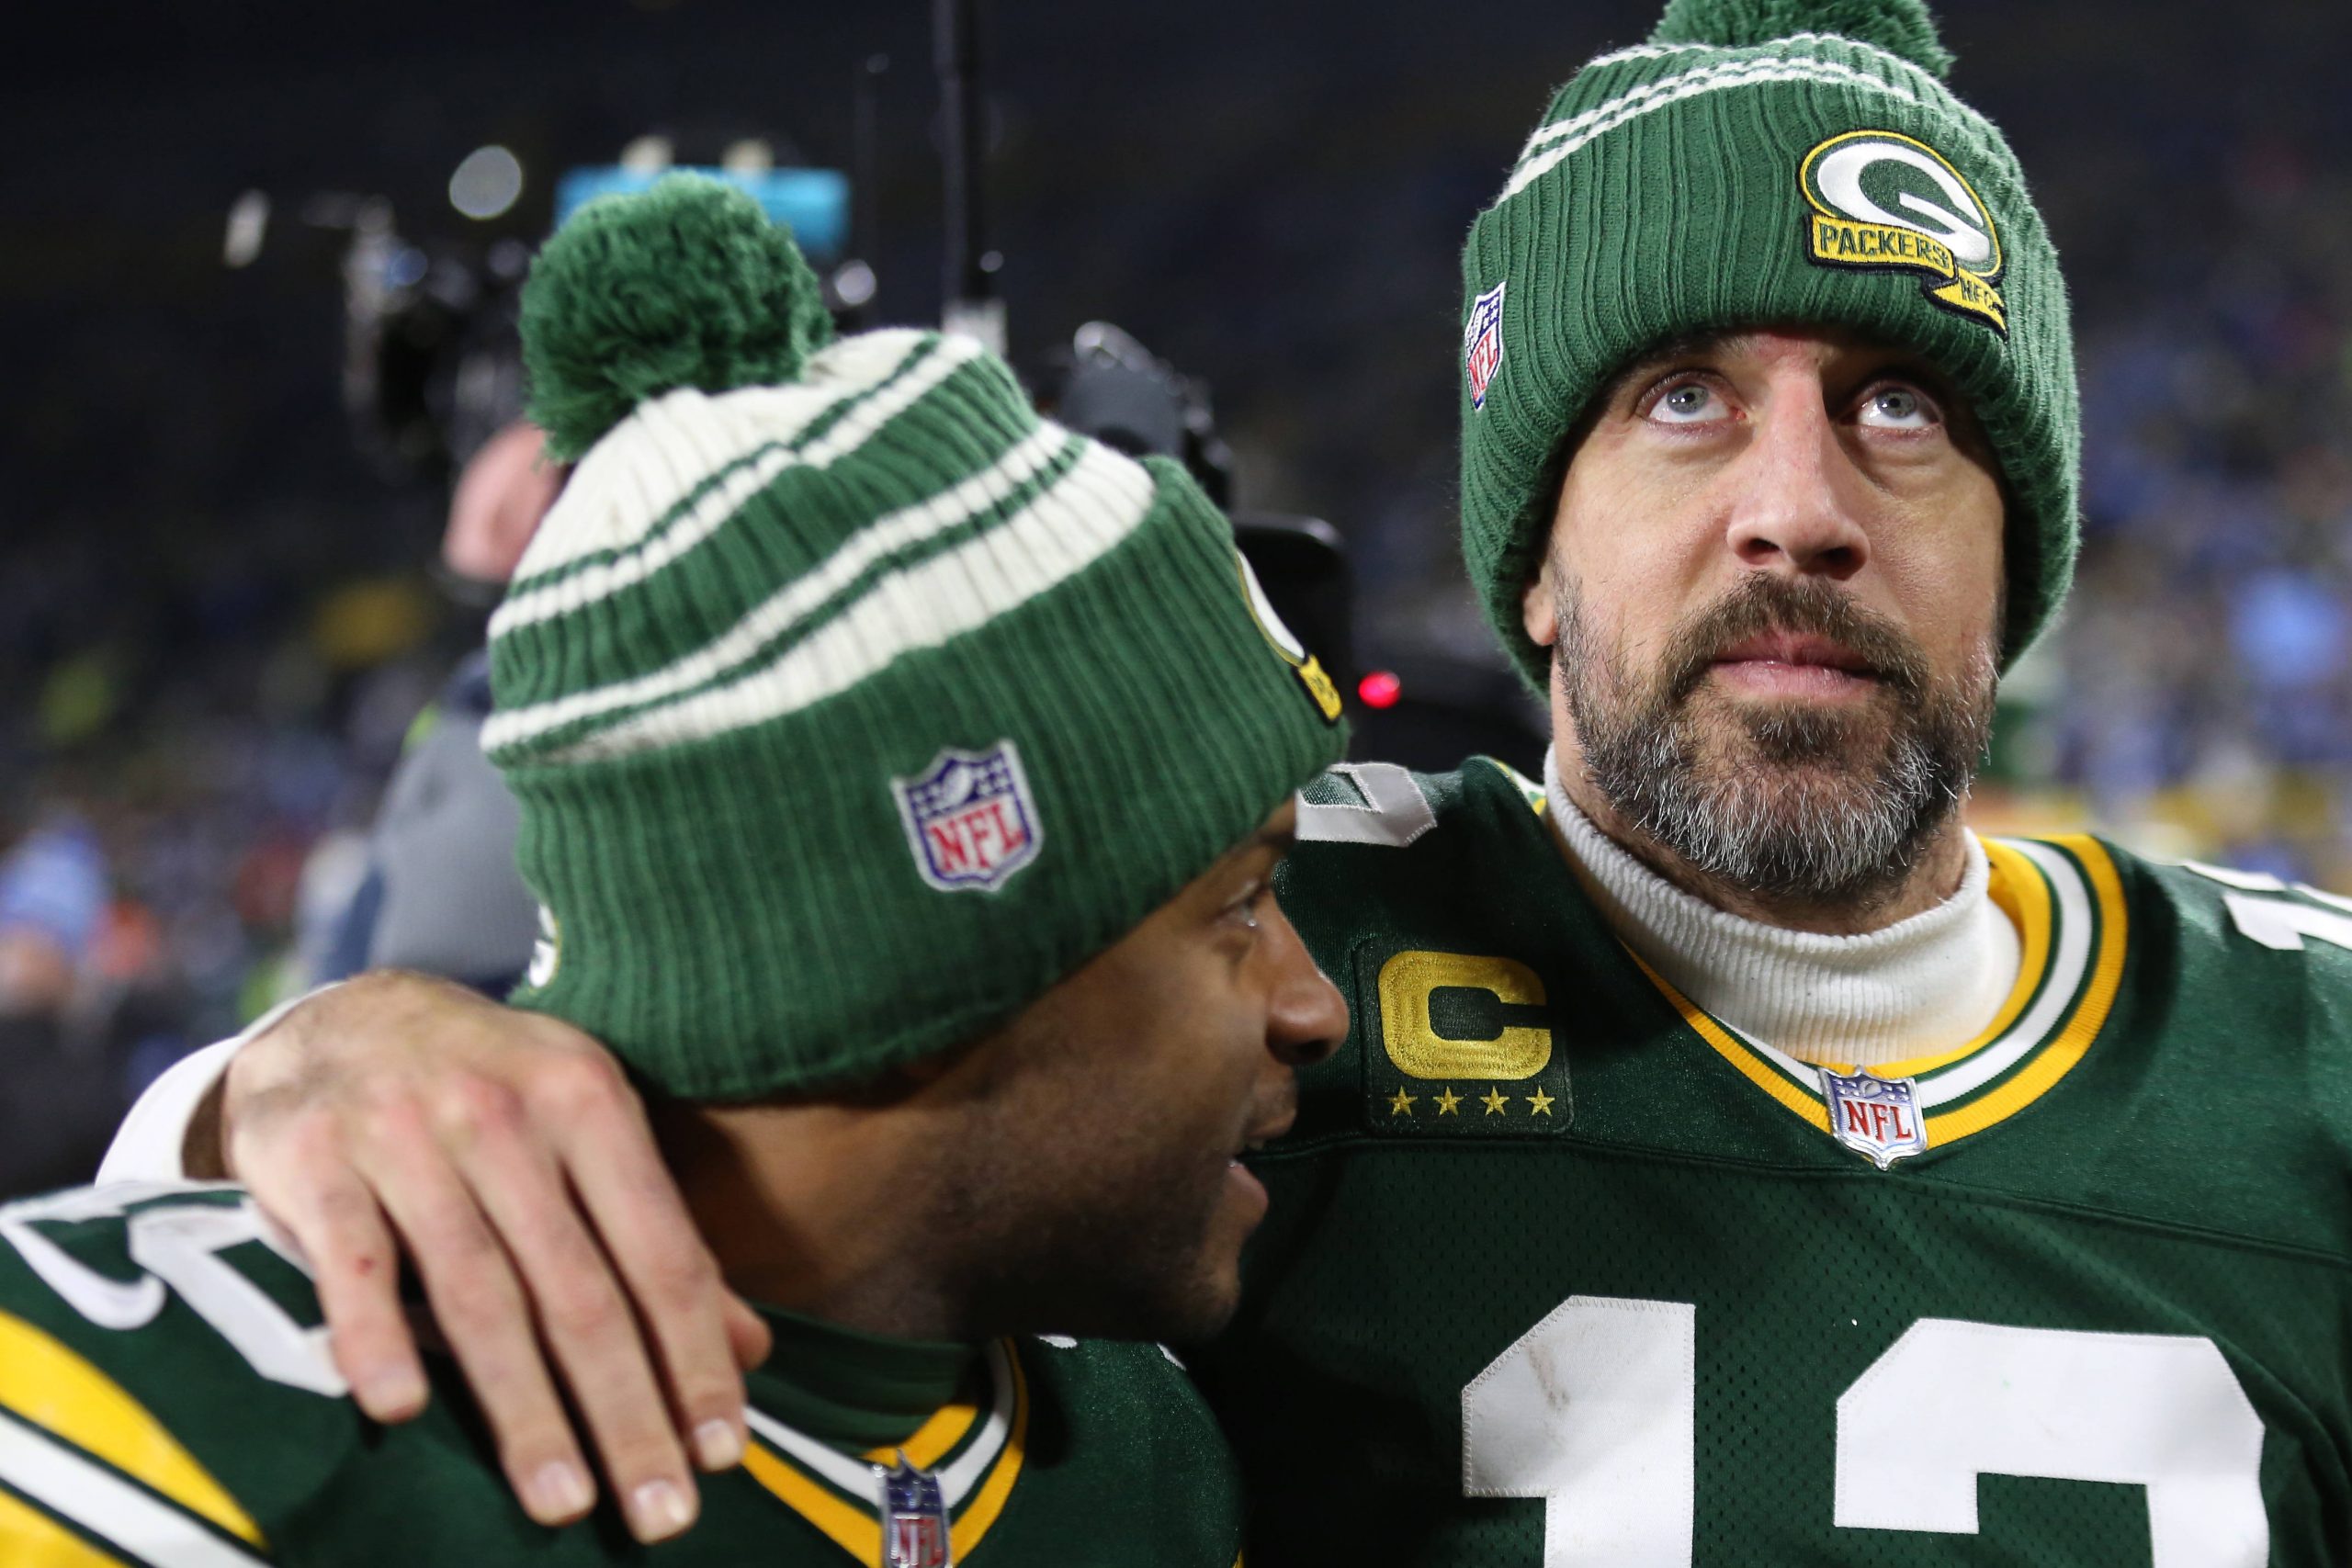 GREEN BAY, WI - JANUARY 08: Green Bay Packers quarterback Aaron Rodgers 12 and Green Bay Packers wide receiver Randall Cobb 18 walk off the field after a game between the Green Bay Packers and the Detroit Lions at Lambeau Field on January 8, 2023 in Green Bay, WI. Photo by Larry Radloff/Icon Sportswire NFL, American Football Herren, USA JAN 08 Lions at Packers Icon2301082392